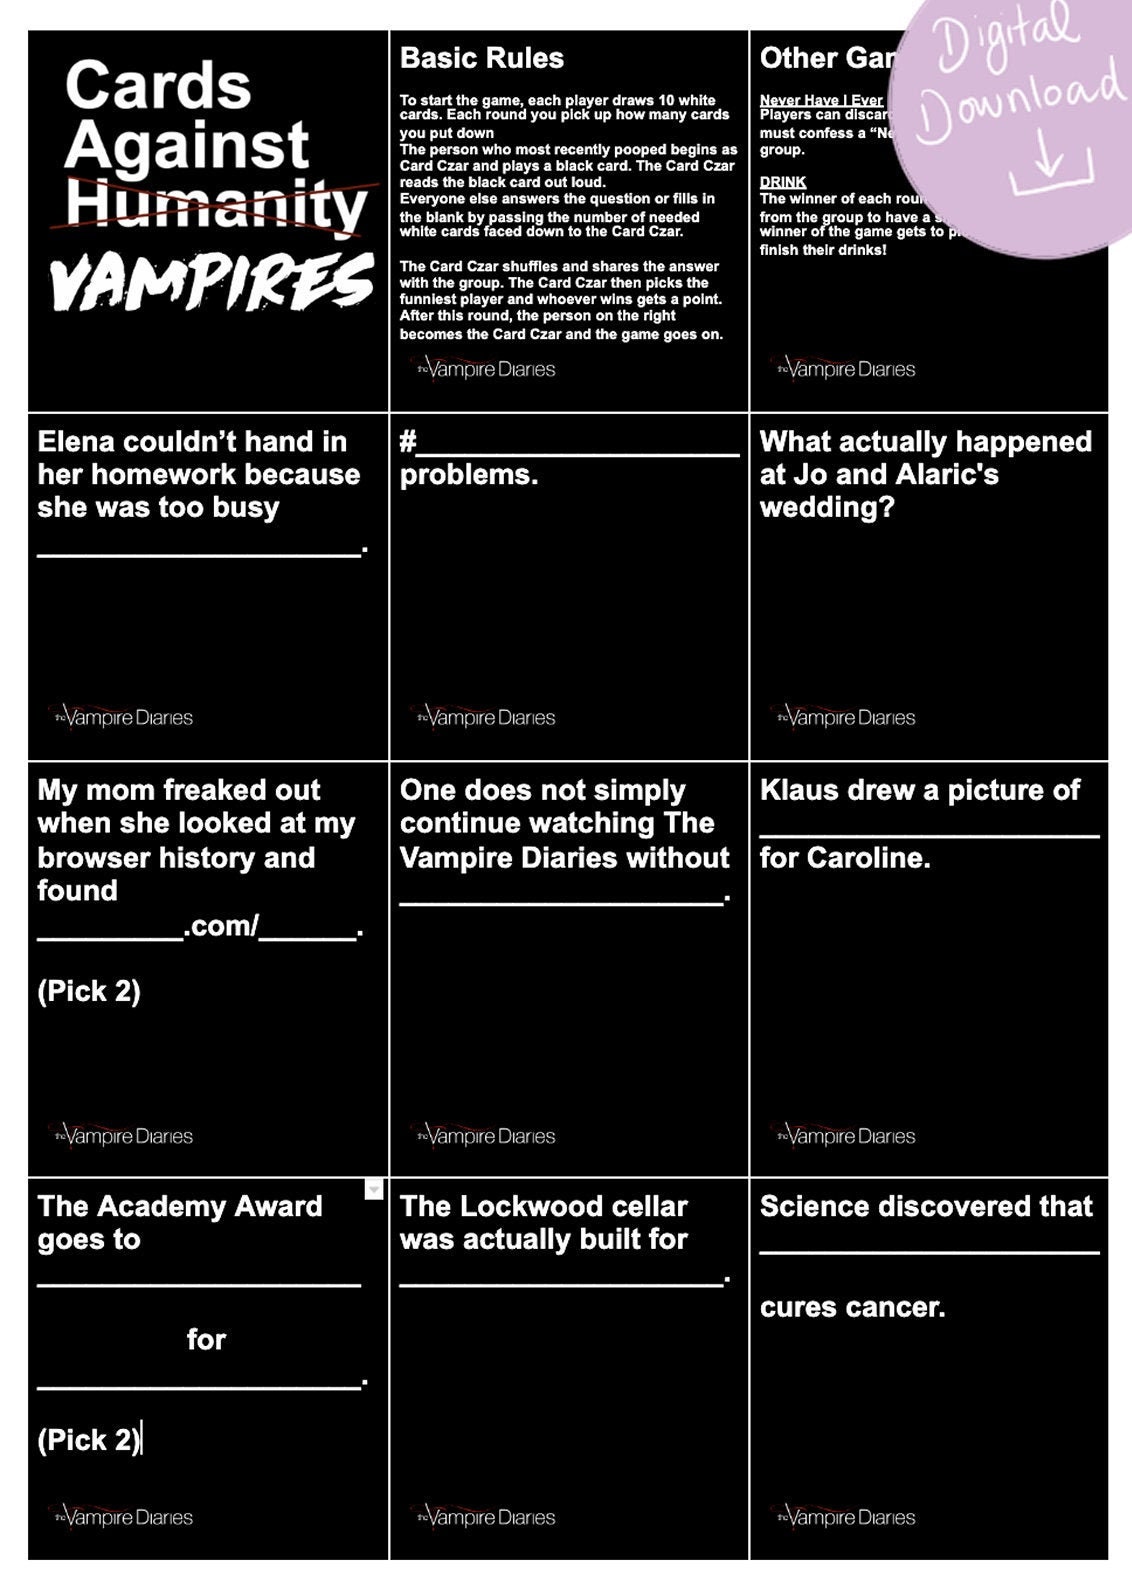 Cards Against Vampires (TVD Version)  Cards Against Humanity  Printable  Games  Digital Download  The Vampire Diaries  21 cards Intended For Cards Against Humanity Template